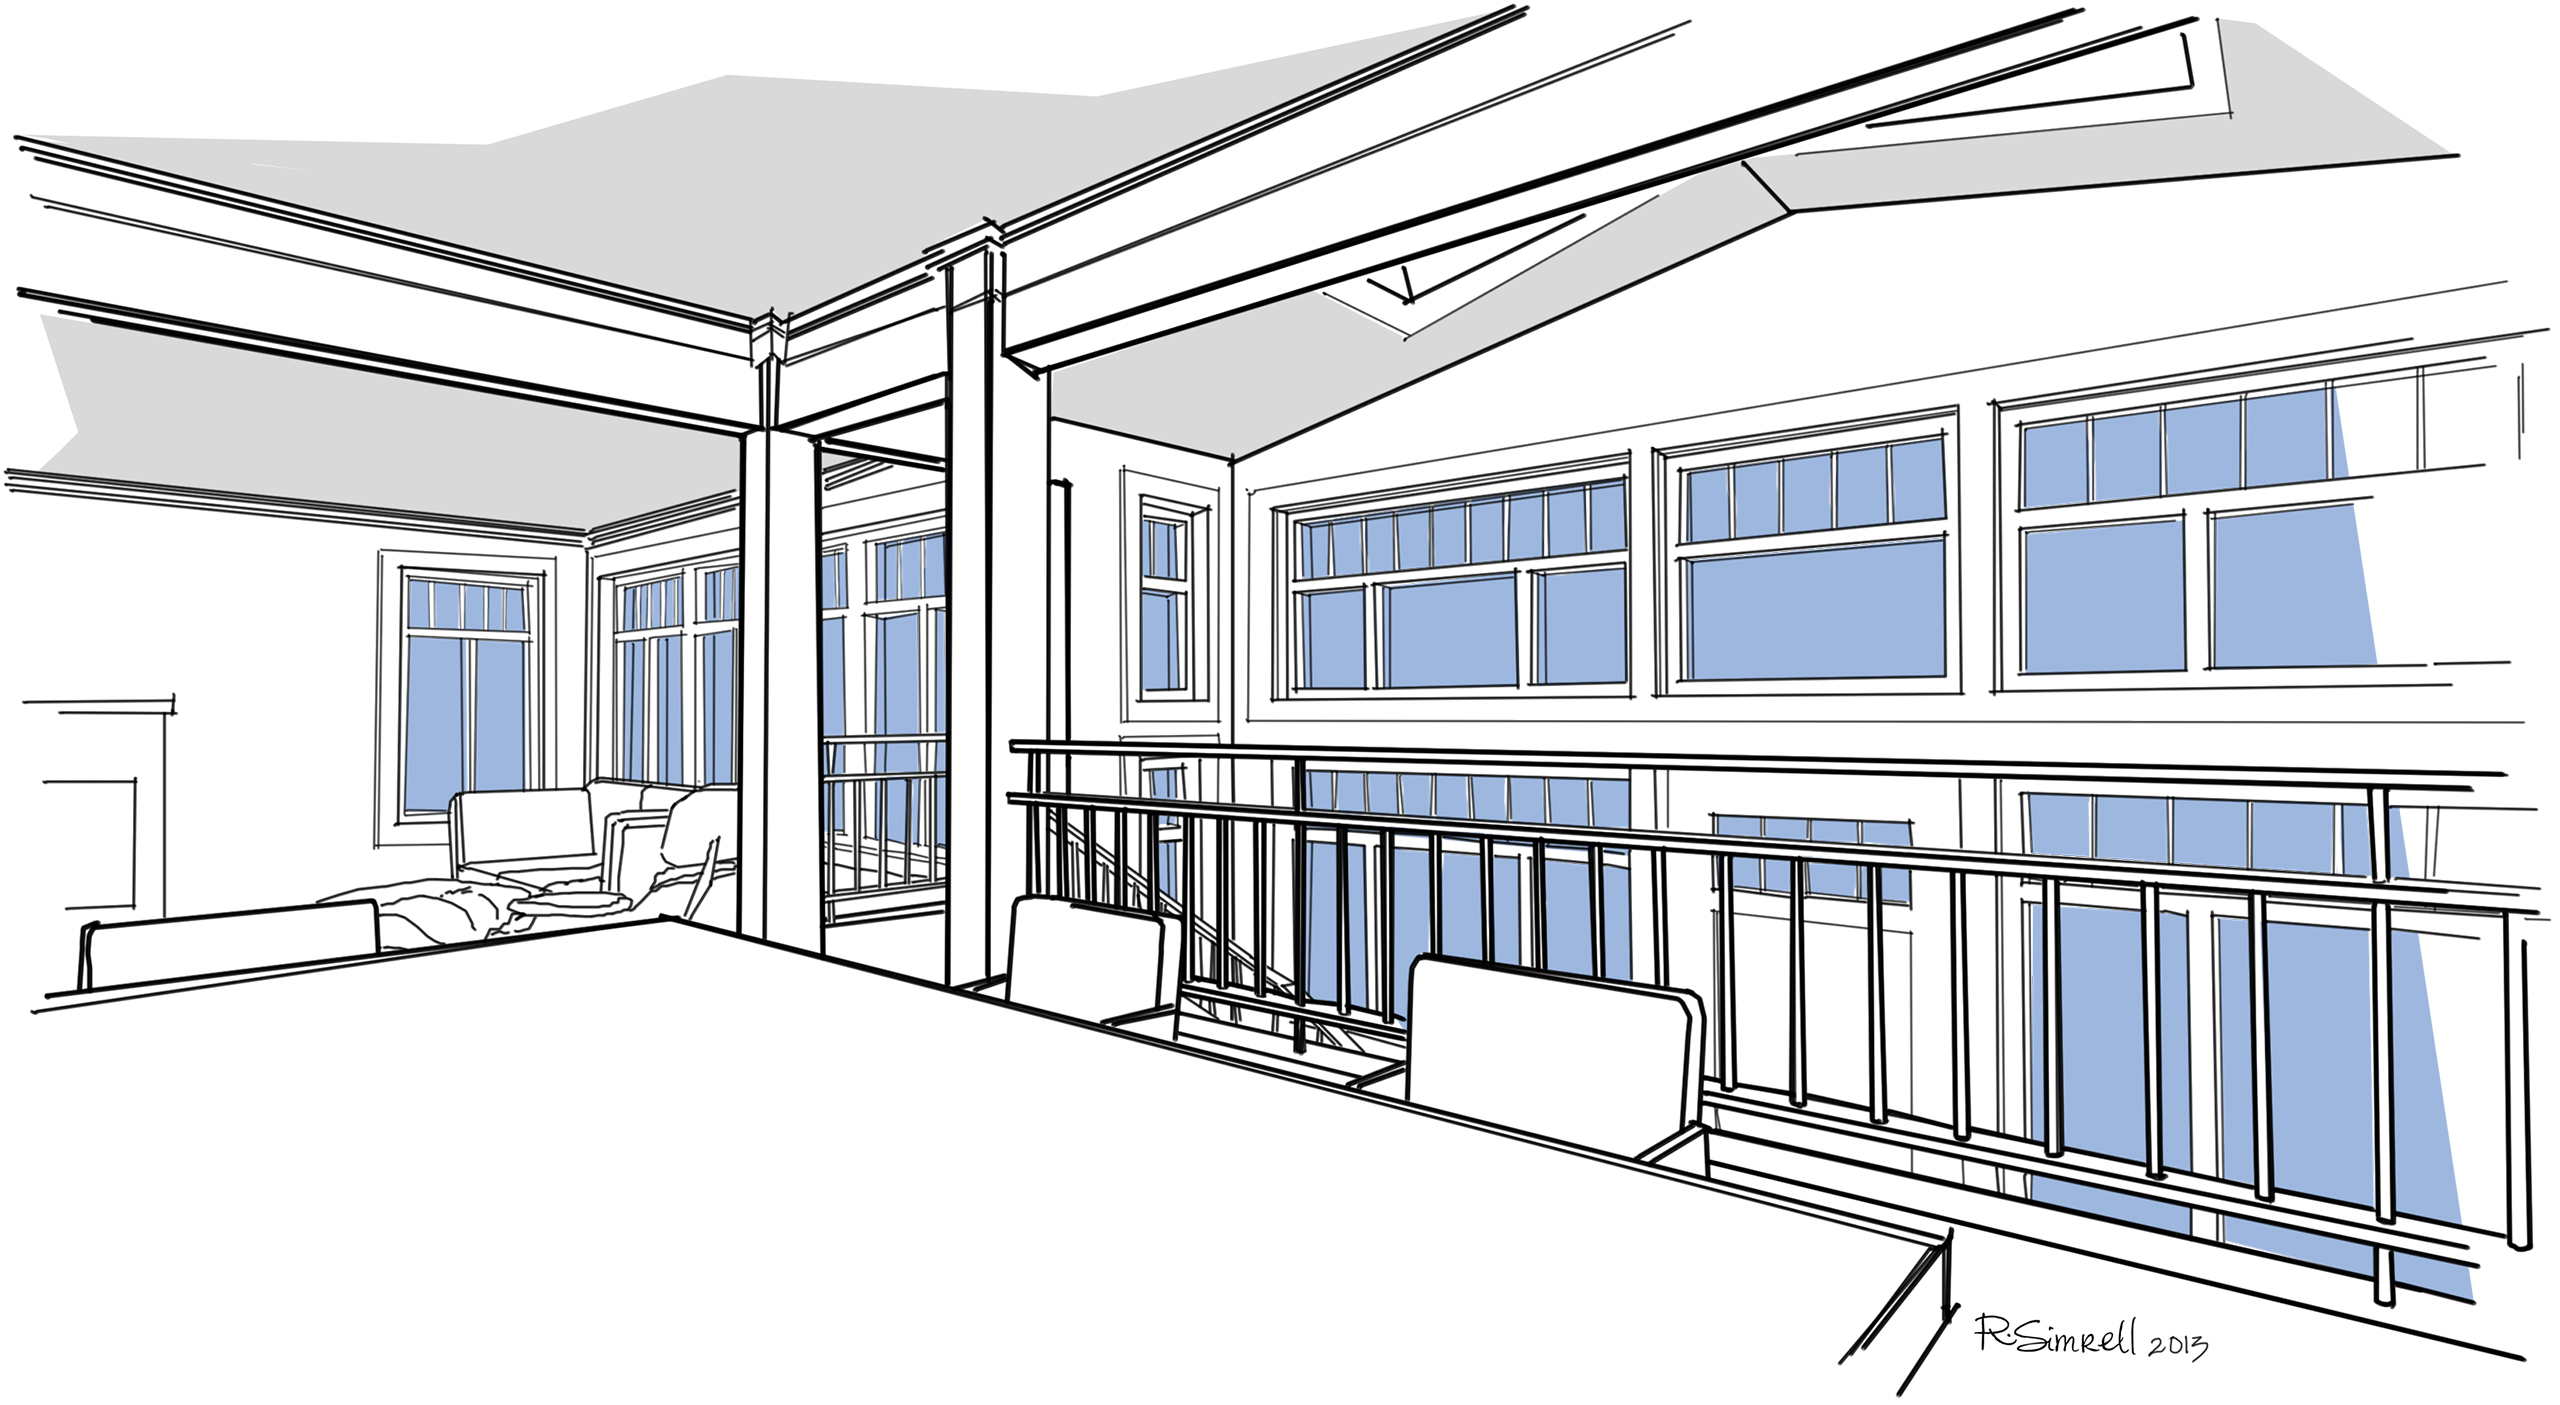 92nd Street Remodel & Addition: Early Design Sketches - An Open Plan with the Windows Galore